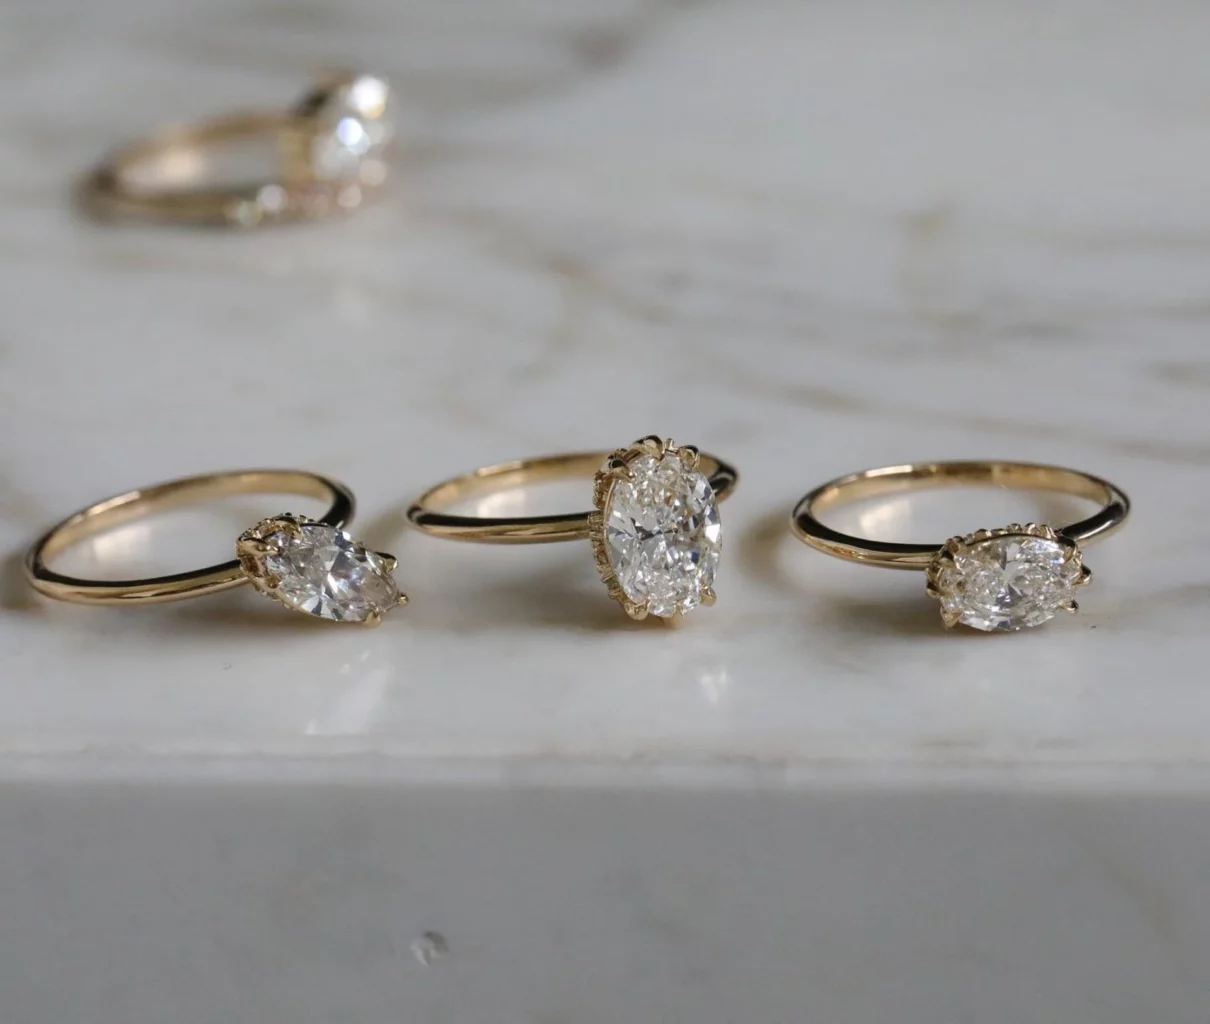 How to Shop for a Diamond Engagement Ring - The Bridal Journey